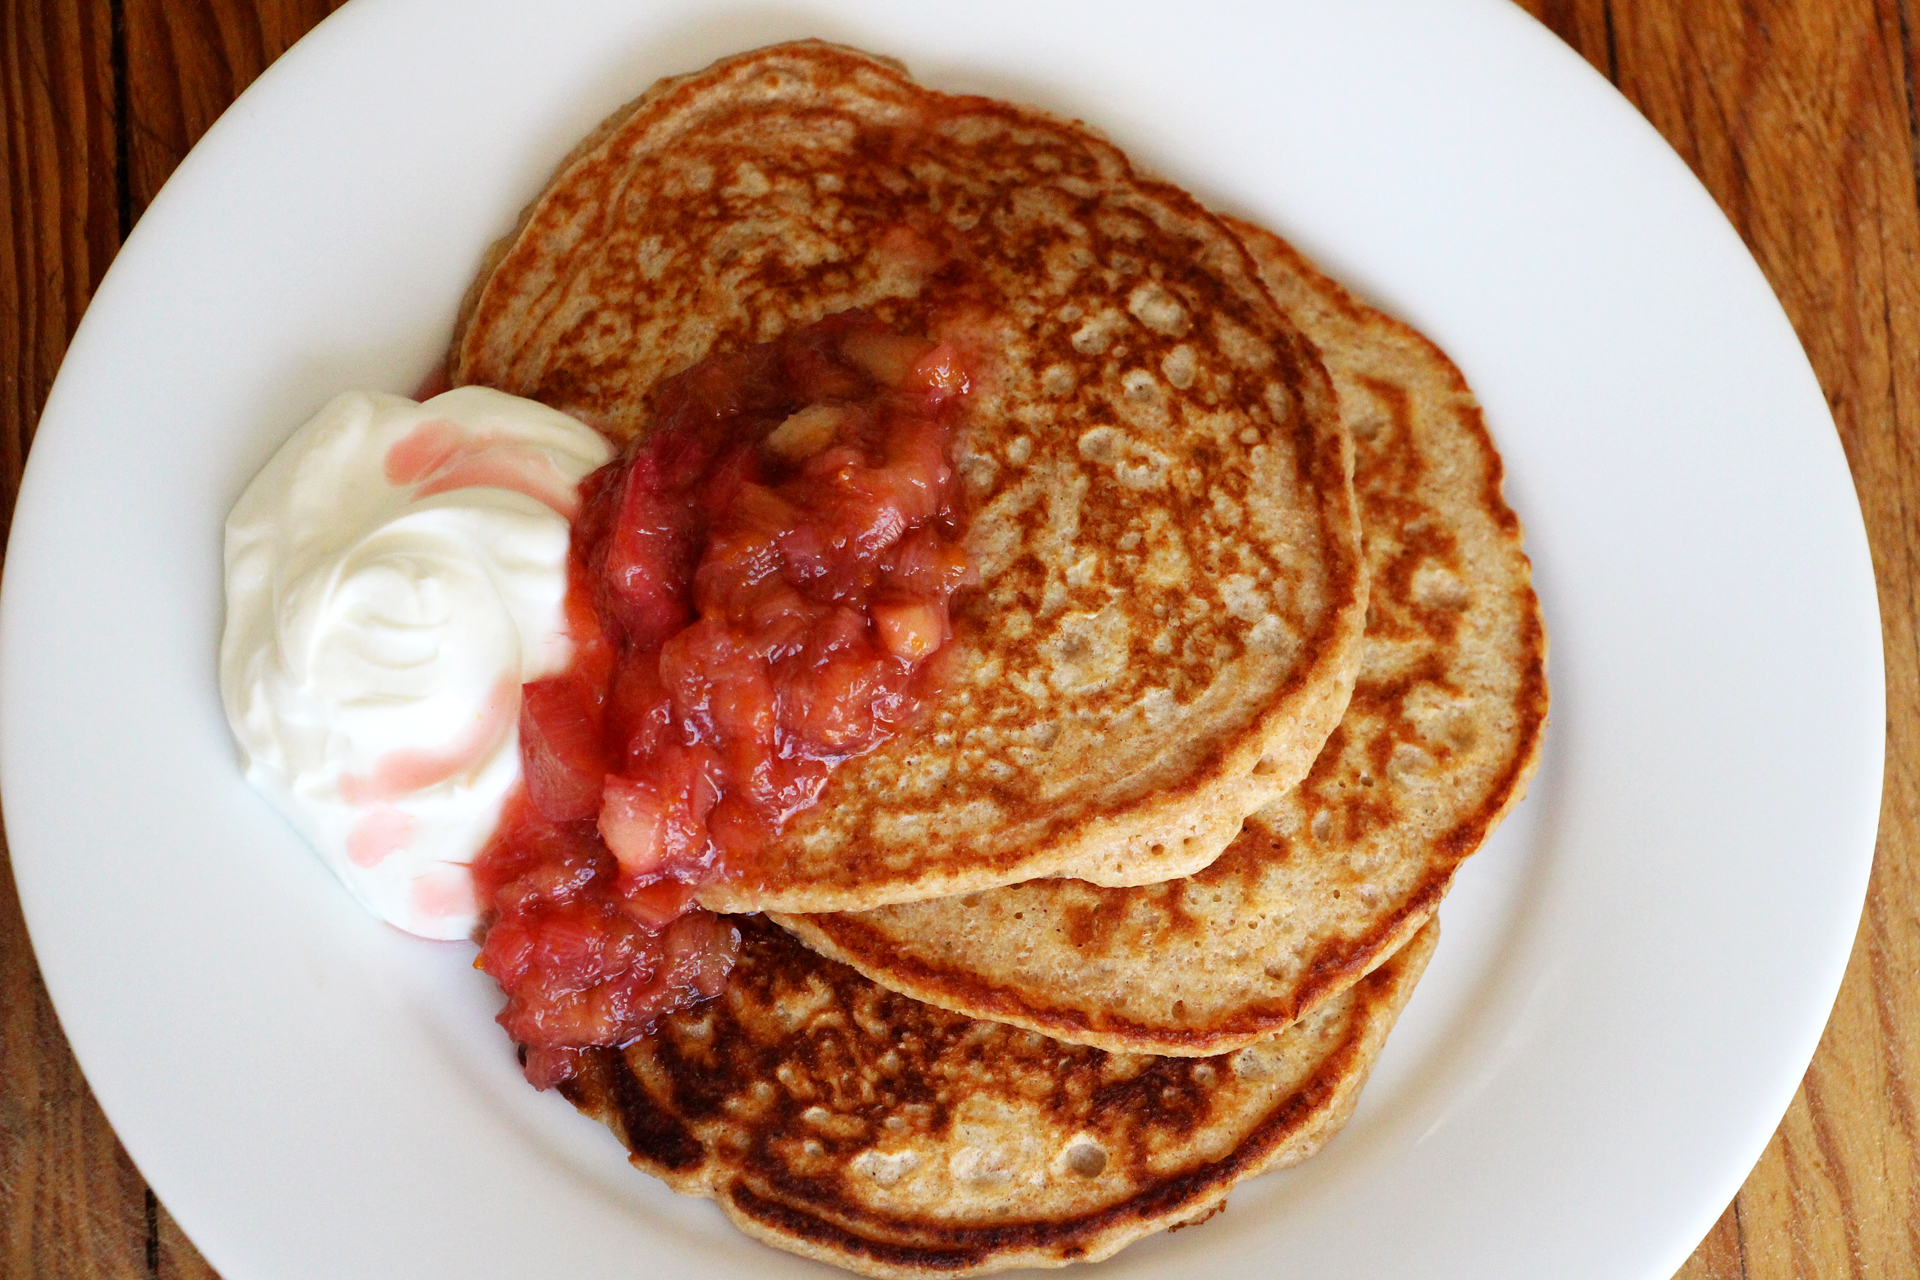 When they are ready, serve them with big spoonfuls of rhubarb compote and a dollop of Greek yogurt.